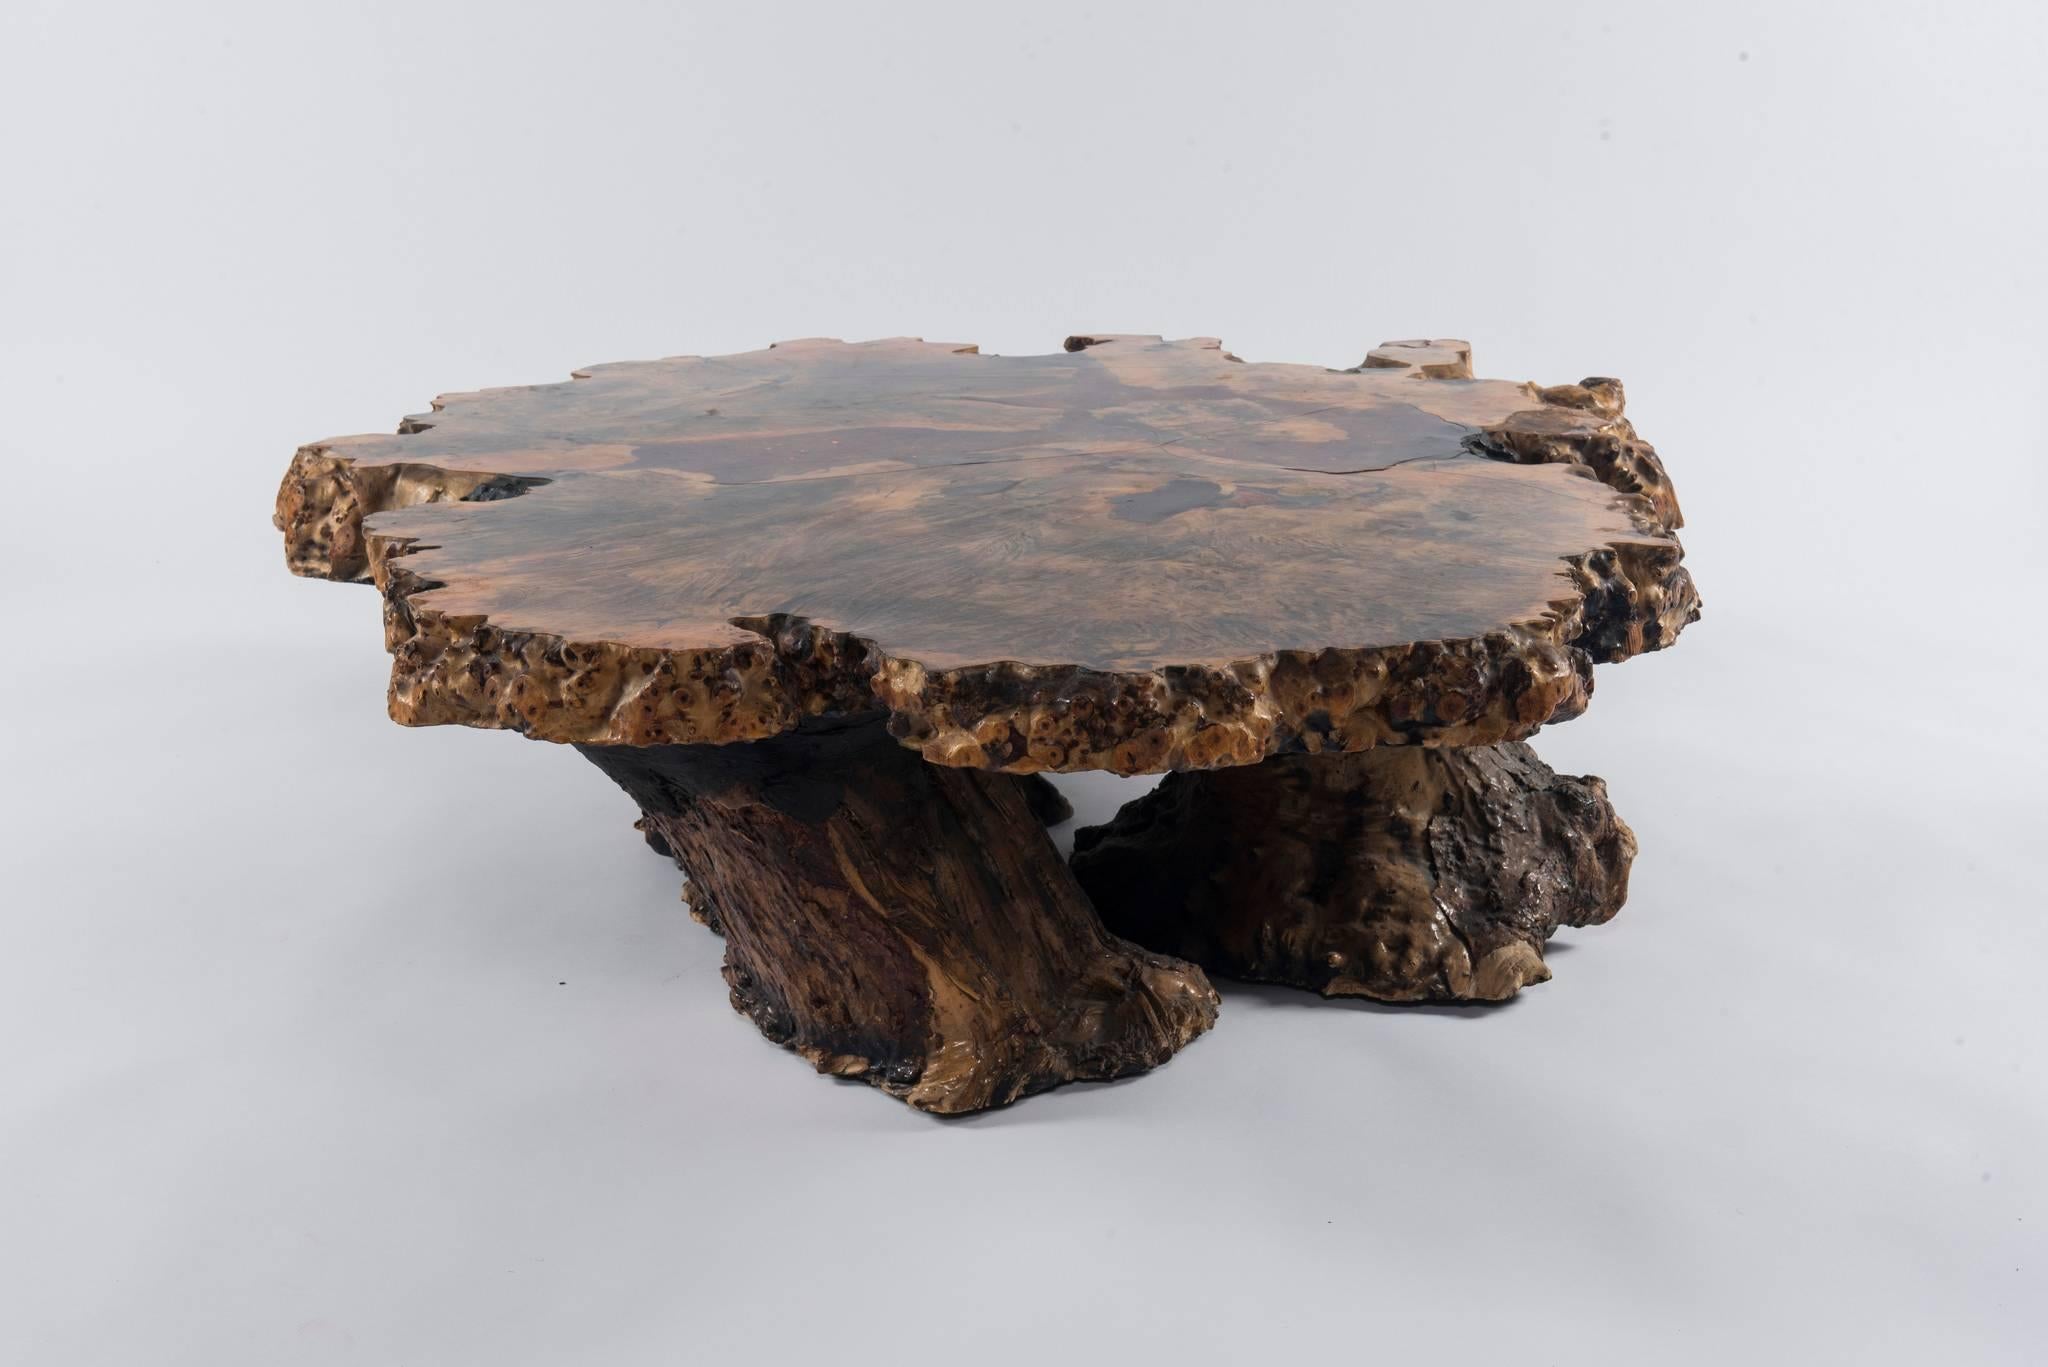 An original star dust table No. 74941 by the Burlwood Co, Redding, California.

This fabulous burl elm table has a seam of mica, citrine crystals and other gems running through the middle section and is larger than most similar tables. It measures